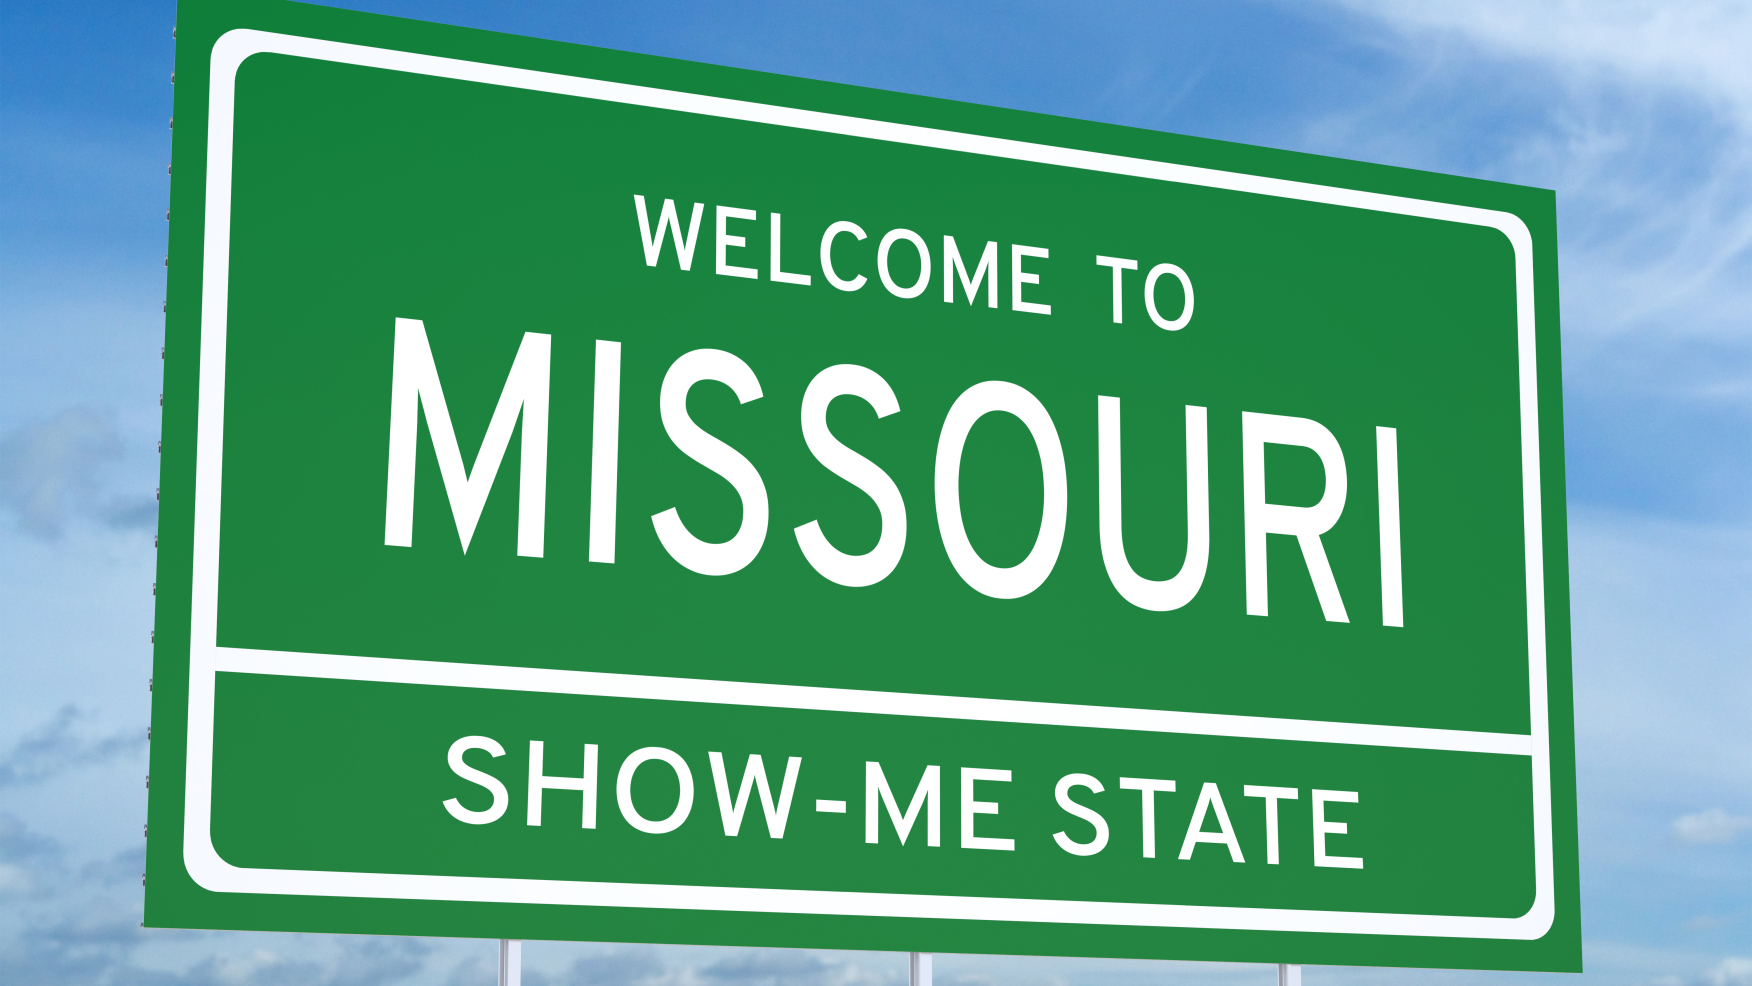 Welcome to Missouri state concept on road sign